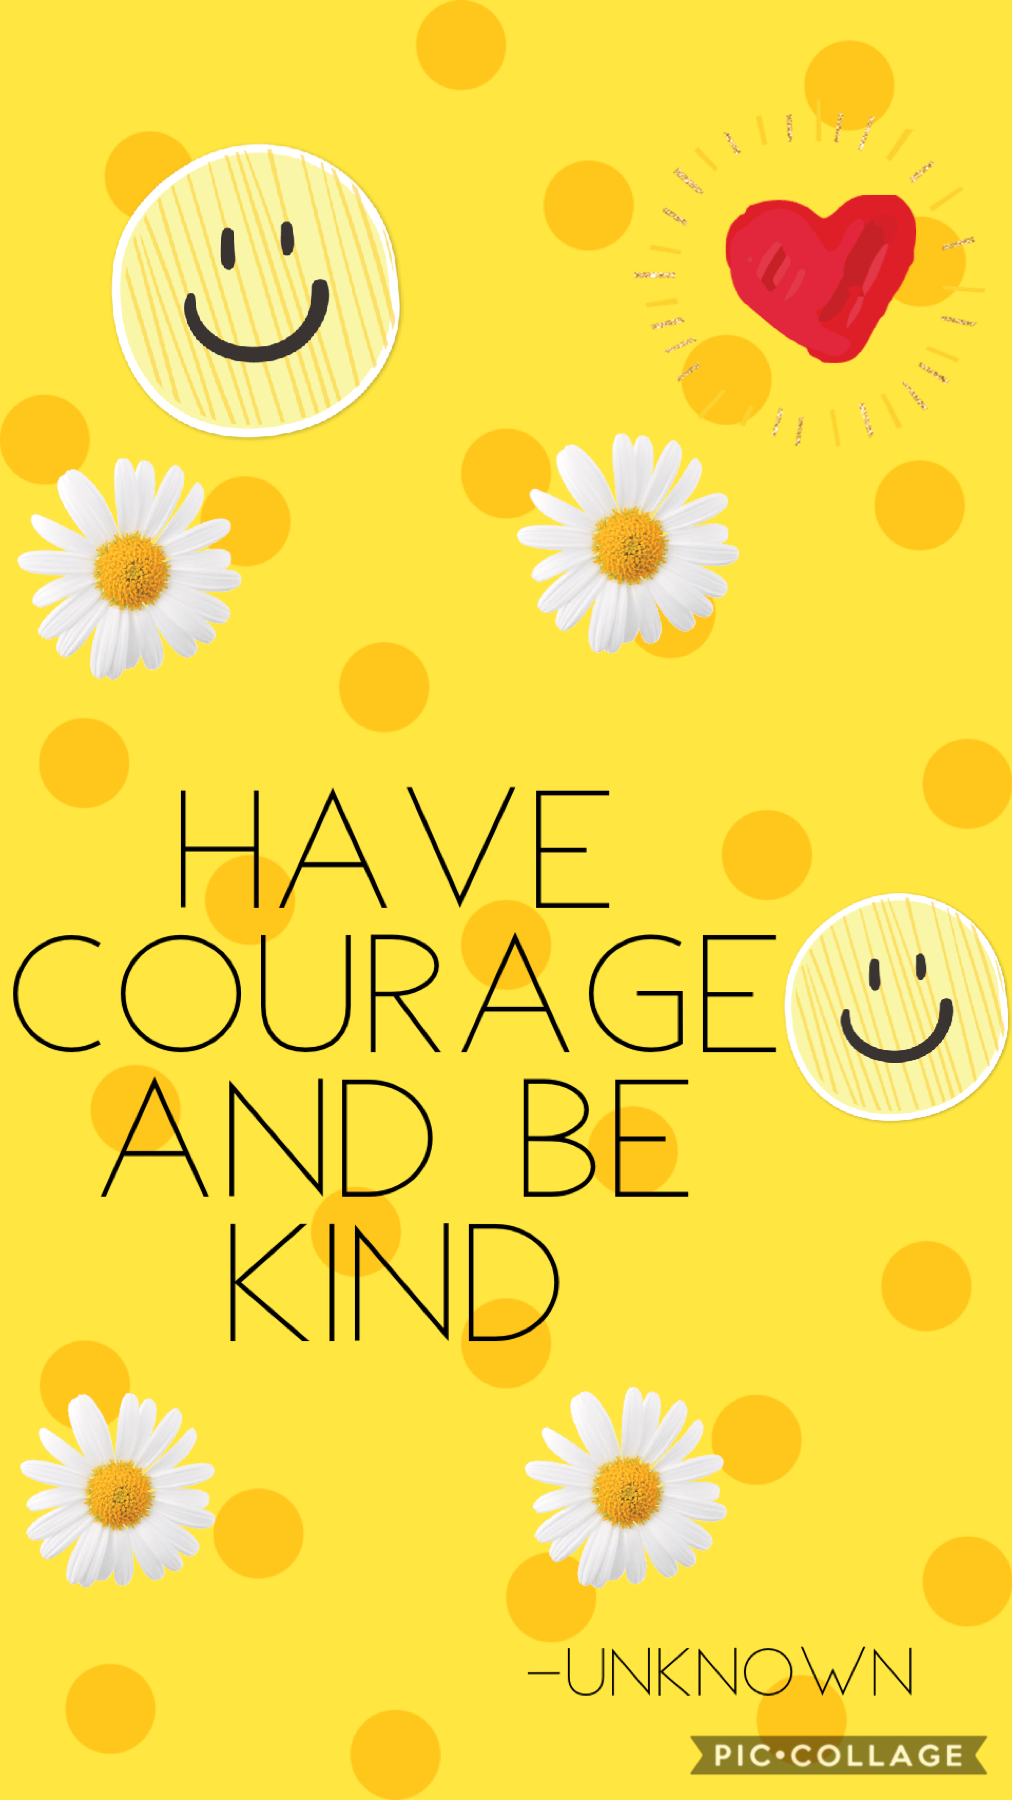 Have courage and be kind -unknown 